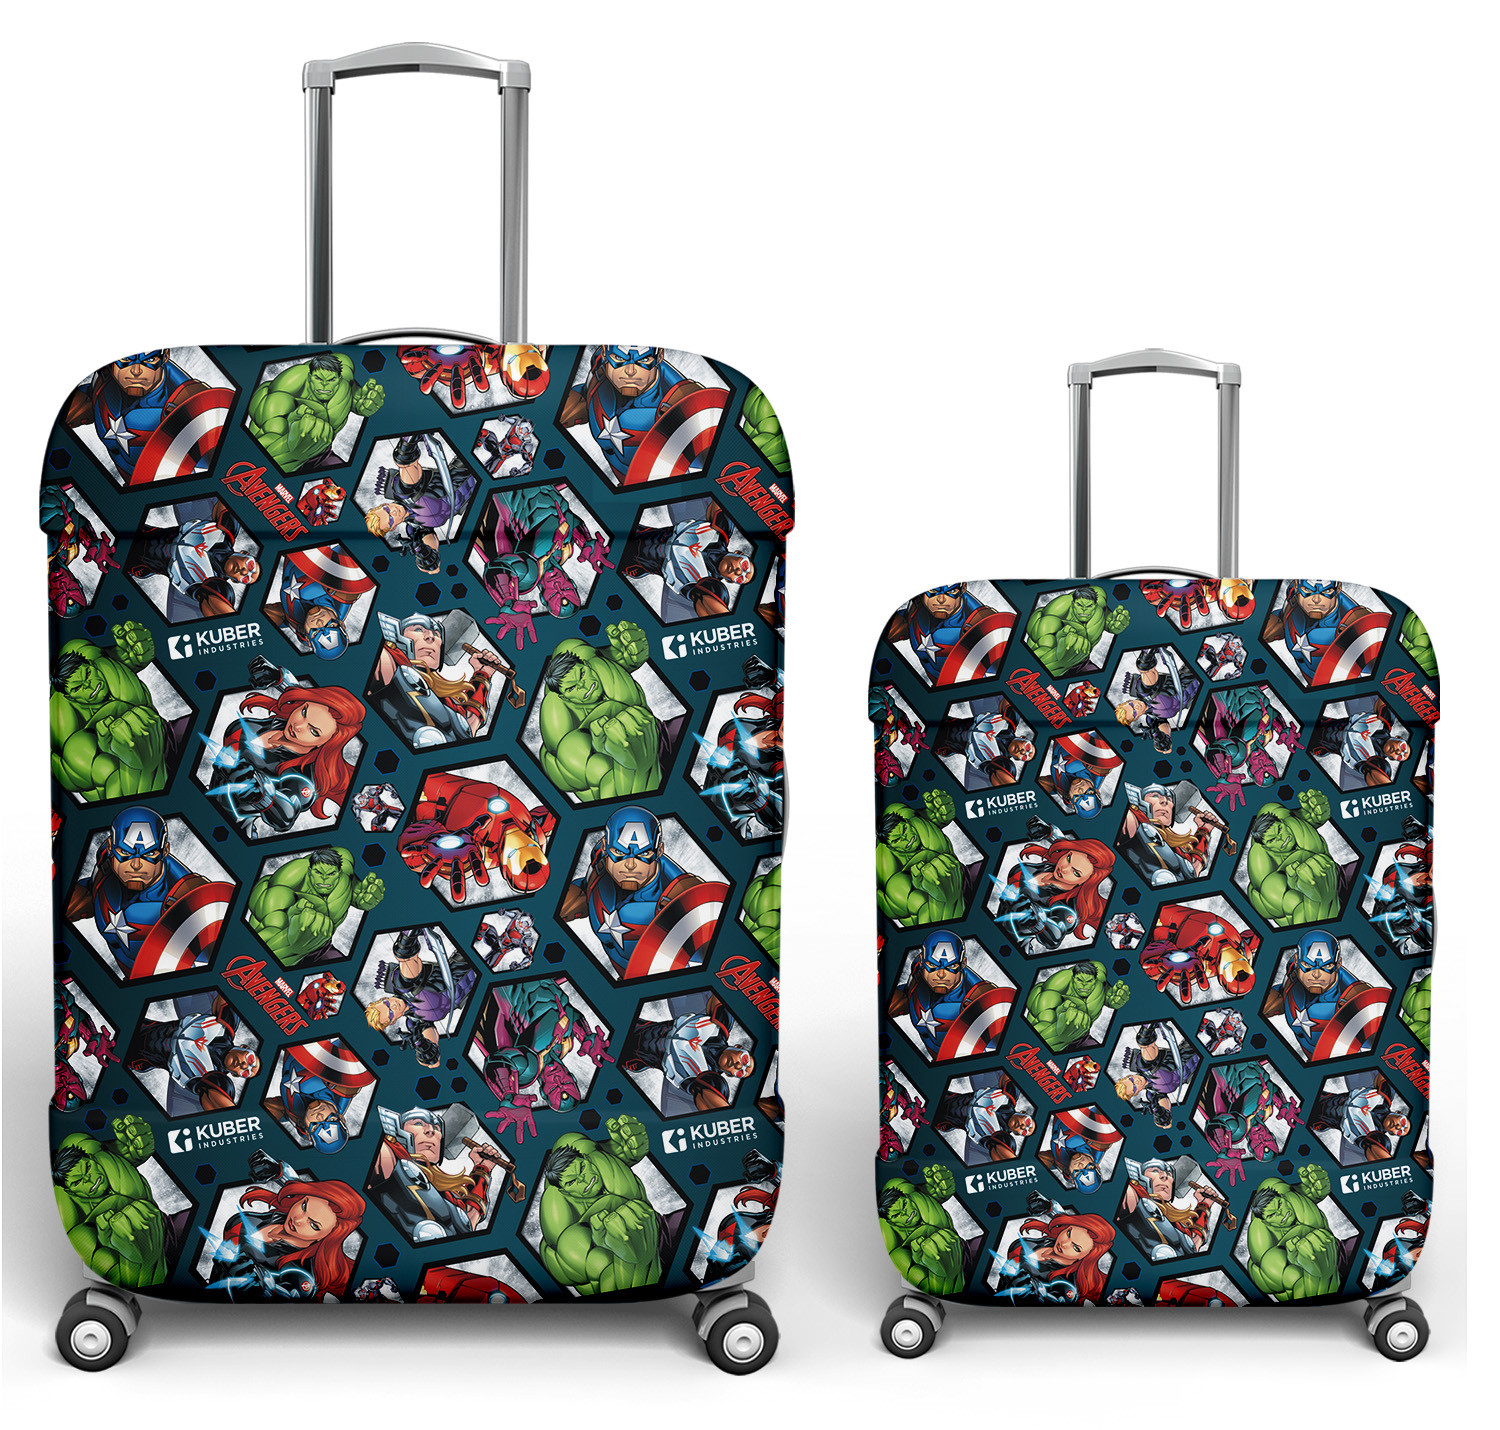 Kuber Industries Marvel Avengers Luggage Cover | Polyester Travel Suitcase Cover | Washable | Stretchable Suitcase Cover | 18-22 Inch-Small | 26-30 Inch-Large | Pack of 2 | Blue